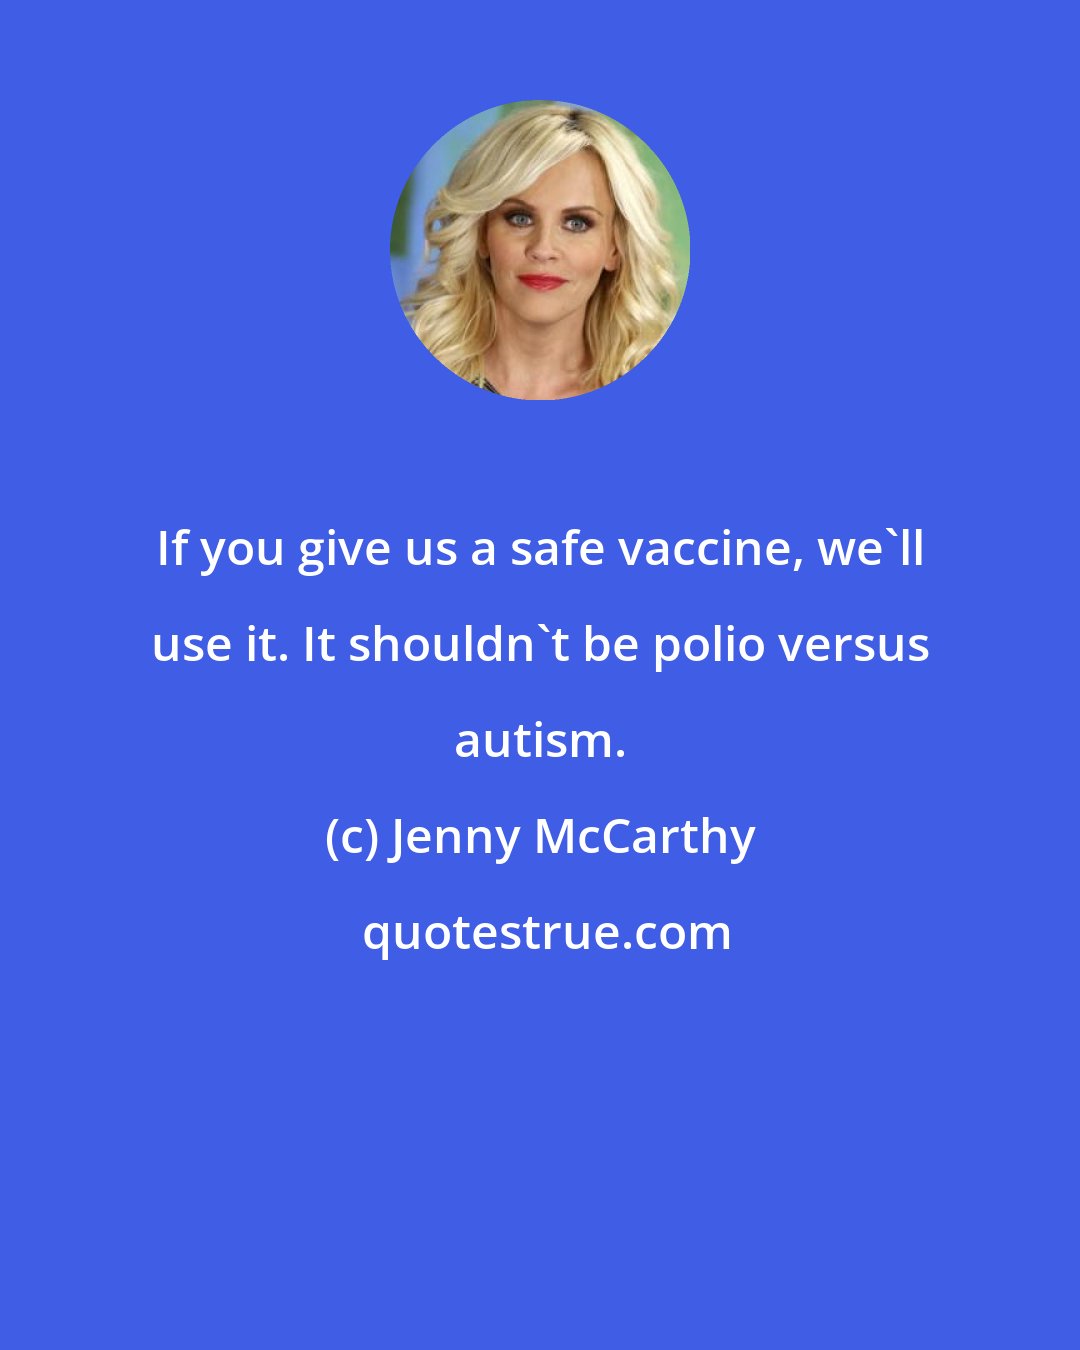 Jenny McCarthy: If you give us a safe vaccine, we'll use it. It shouldn't be polio versus autism.